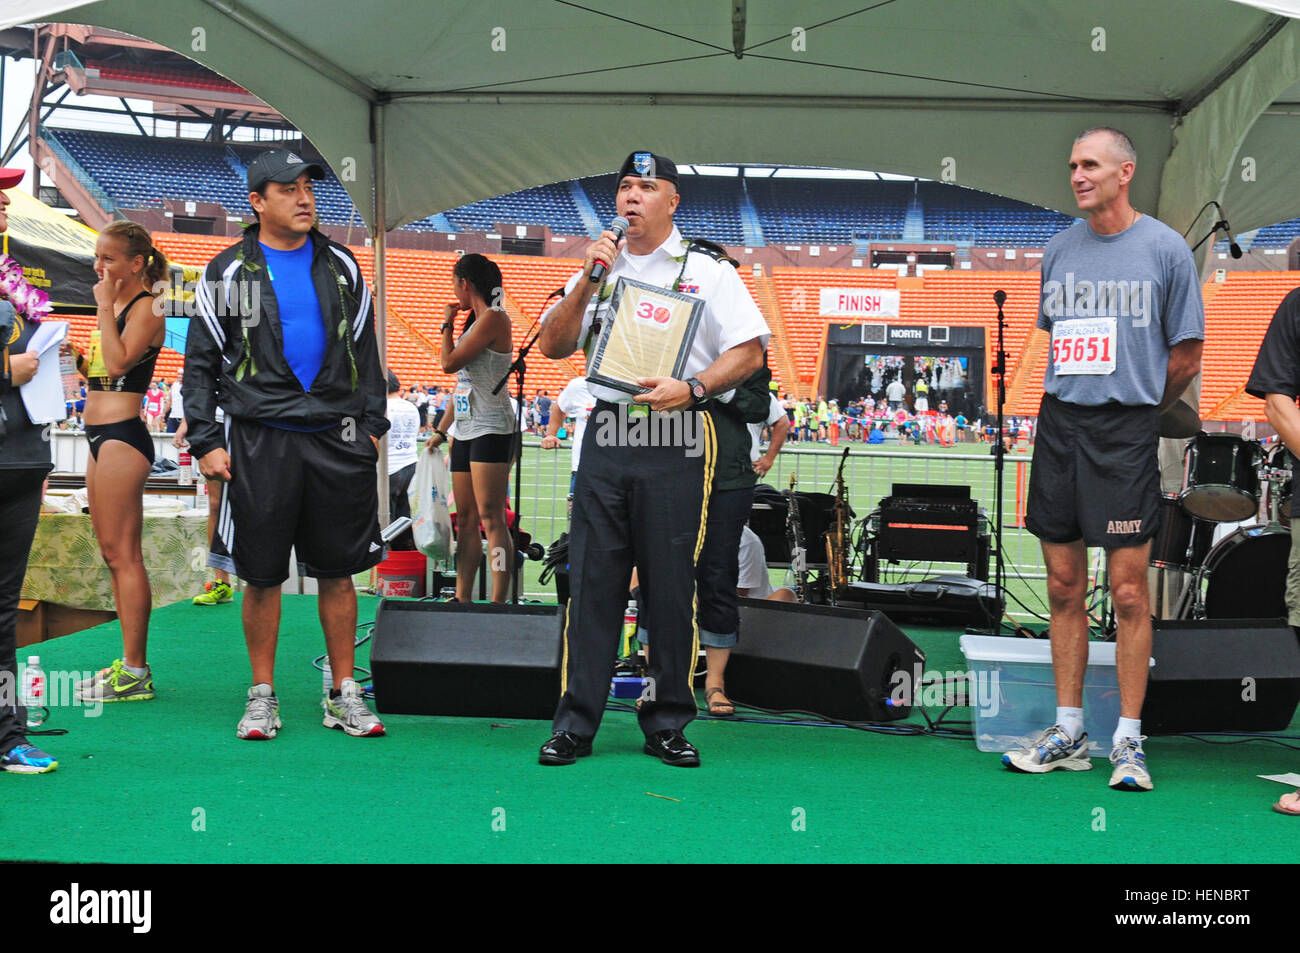 Maj. Gen. Anthony G. Crutchfield, chief of staff, U.S. Pacific Command, thanks the runners and the volunteers of the 30th annual Great Aloha Run during a presentation at the Aloha Stadium, Honolulu, Hawaii Feb. 17, 2014. Crutchfield accepted the plaque on behalf of PACOM for its participation in the event every year for the past 30 years. Great Aloha Run 2014 140217-A-BZ669-656 Stock Photo